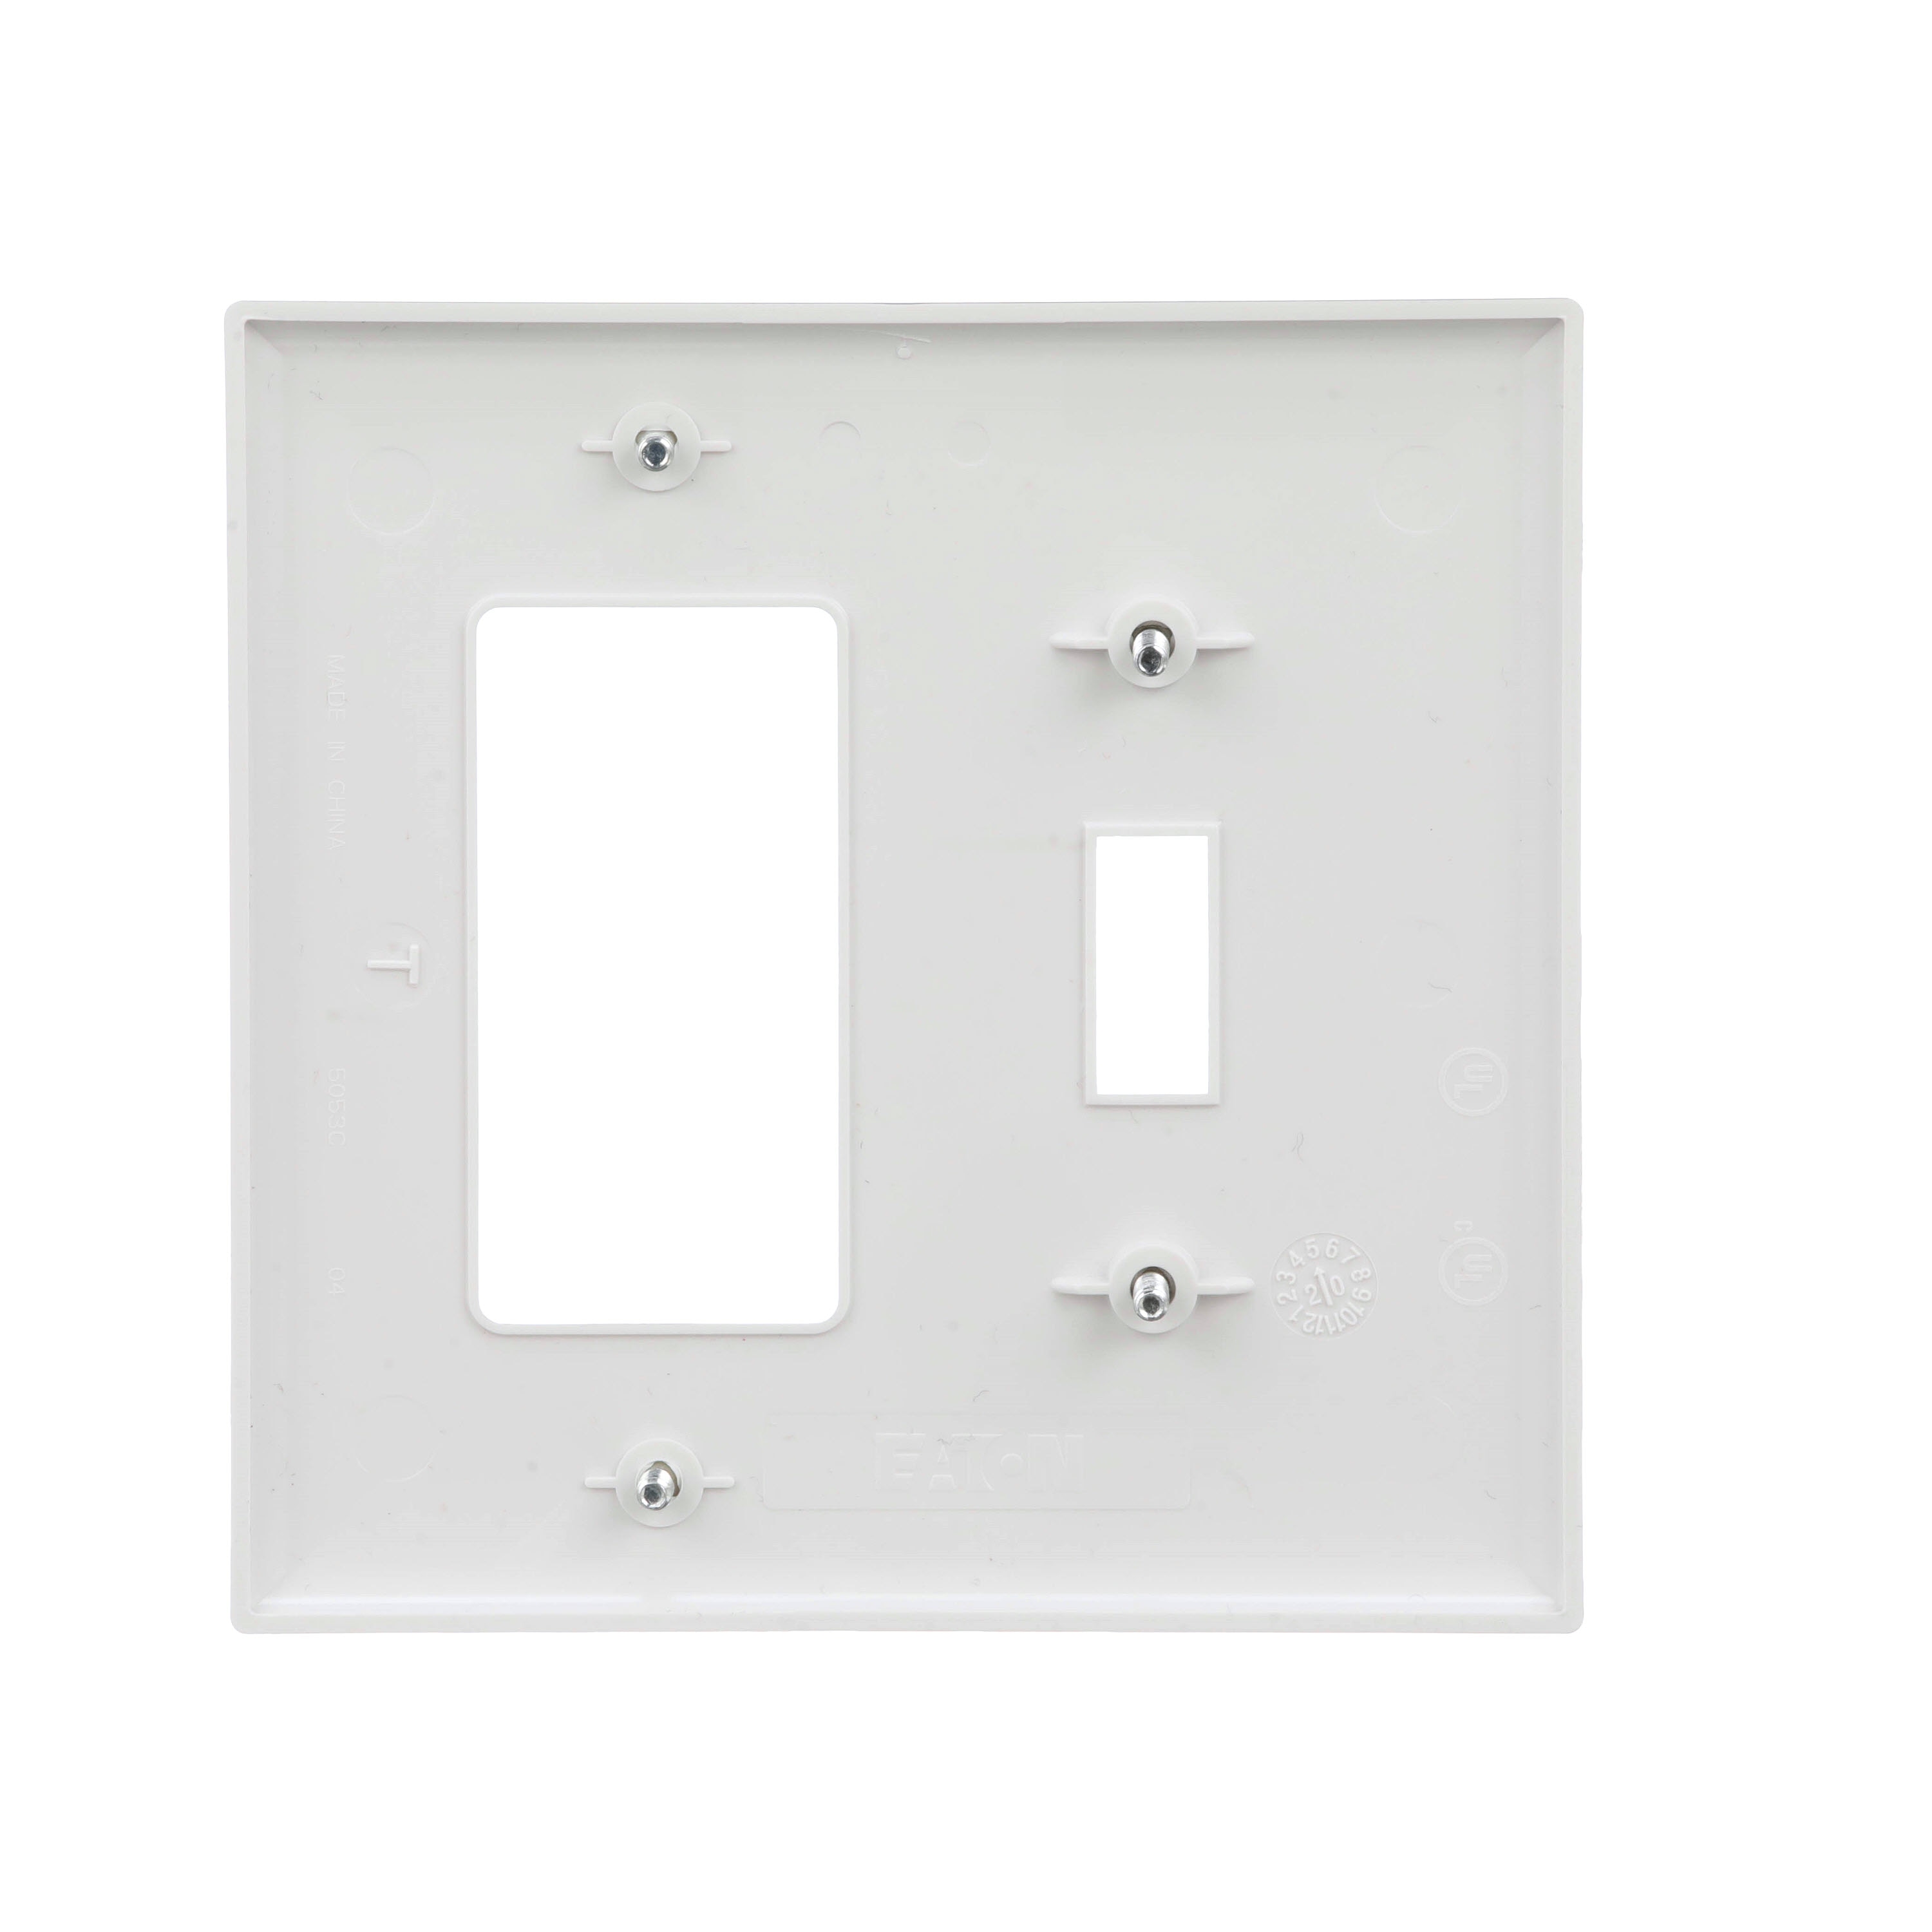 Best Buy: PowerBridge In-Wall Power and Cable Management White 2-PBCK